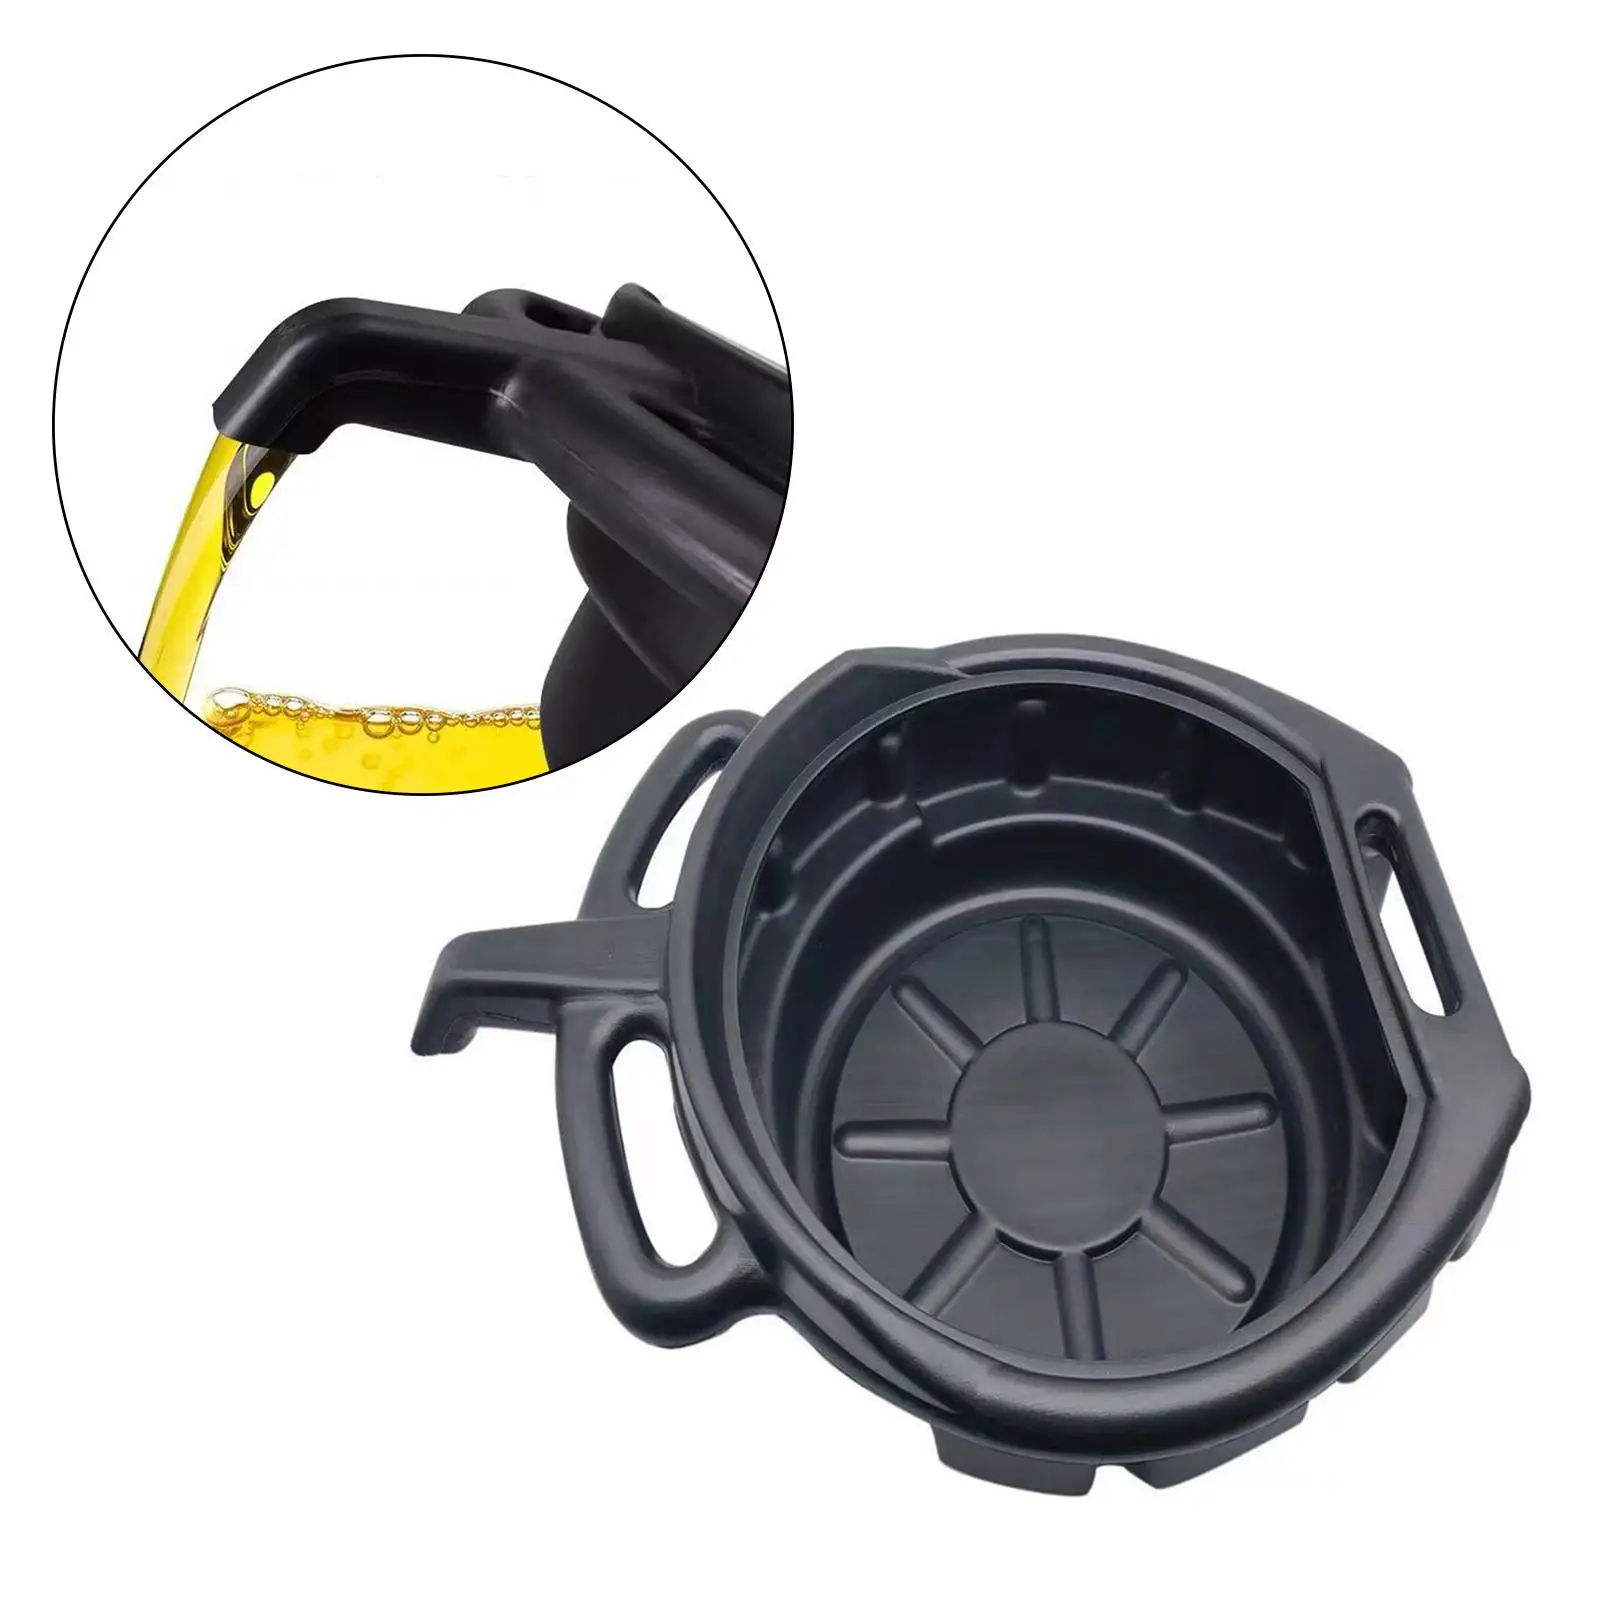 Oil Drain Can Portable Easy to Clean Multifunction Storage Drain Pan for Garage Car Fuel Fluid Garage Tool Vehicle